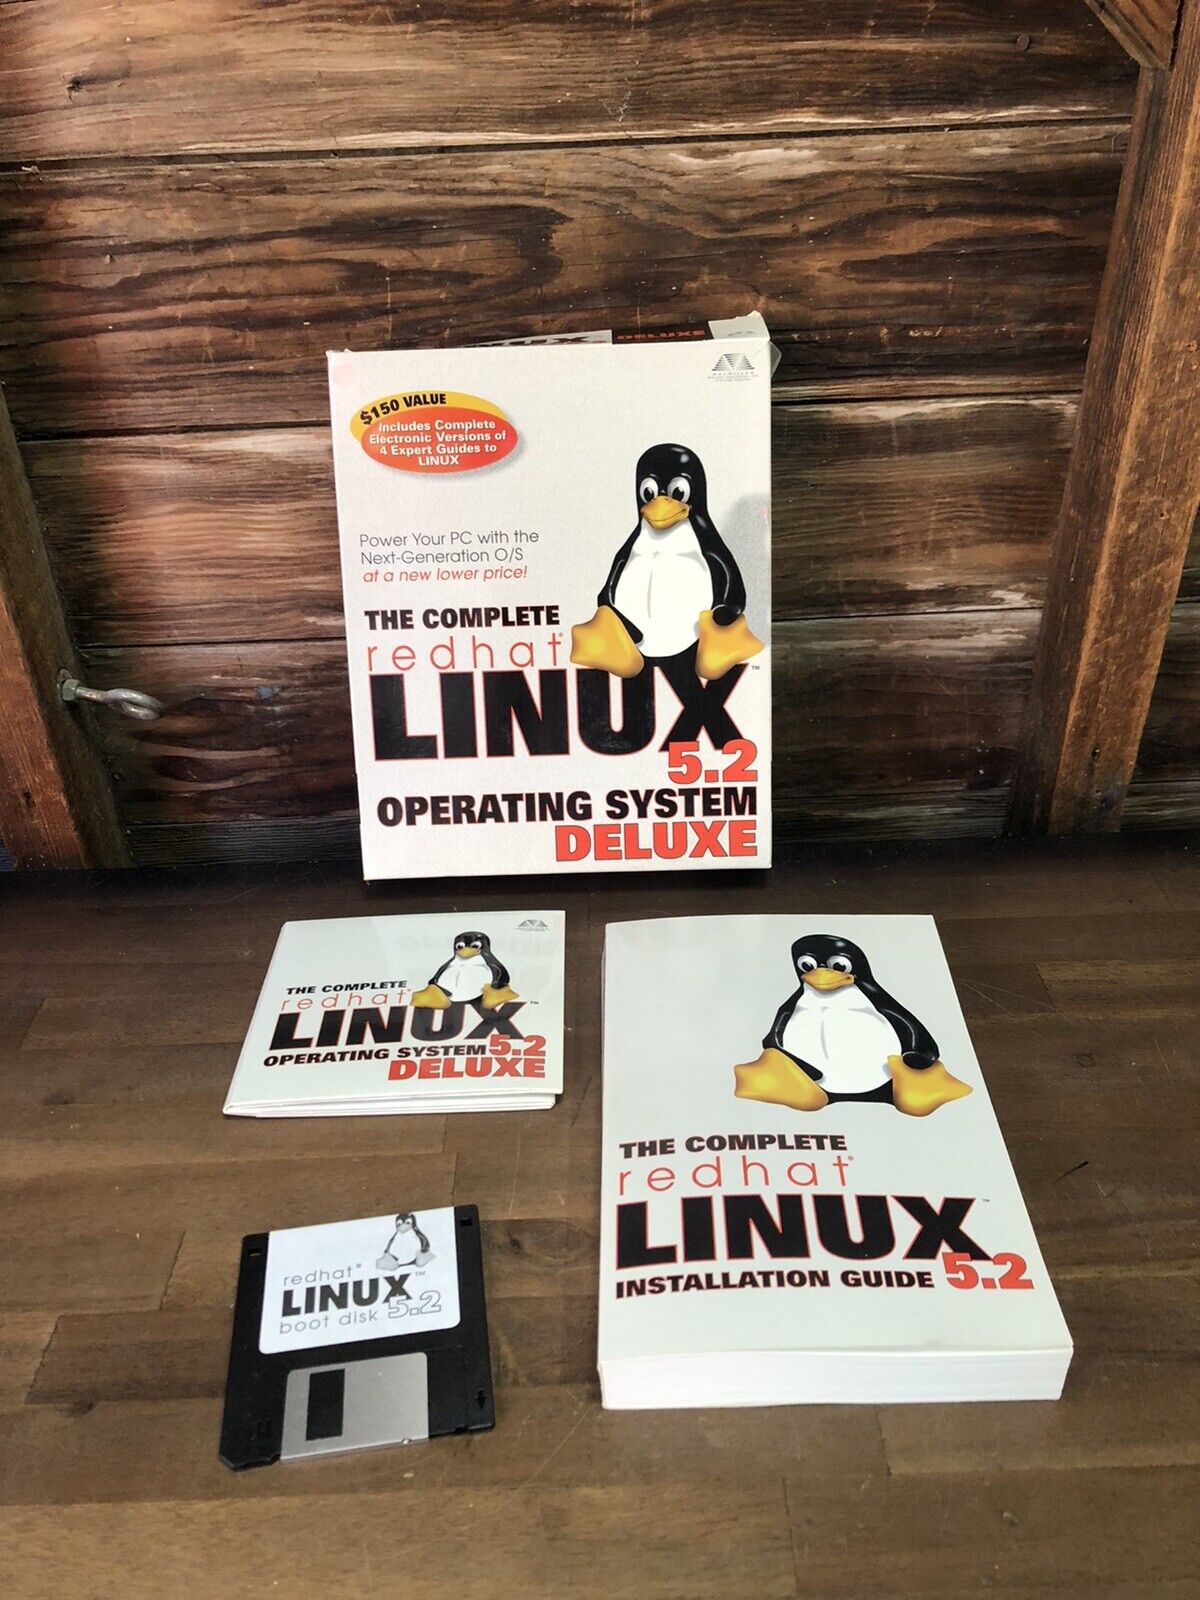 The Complete redhat LINUX 5.2 Operating System Deluxe CD ROM Media